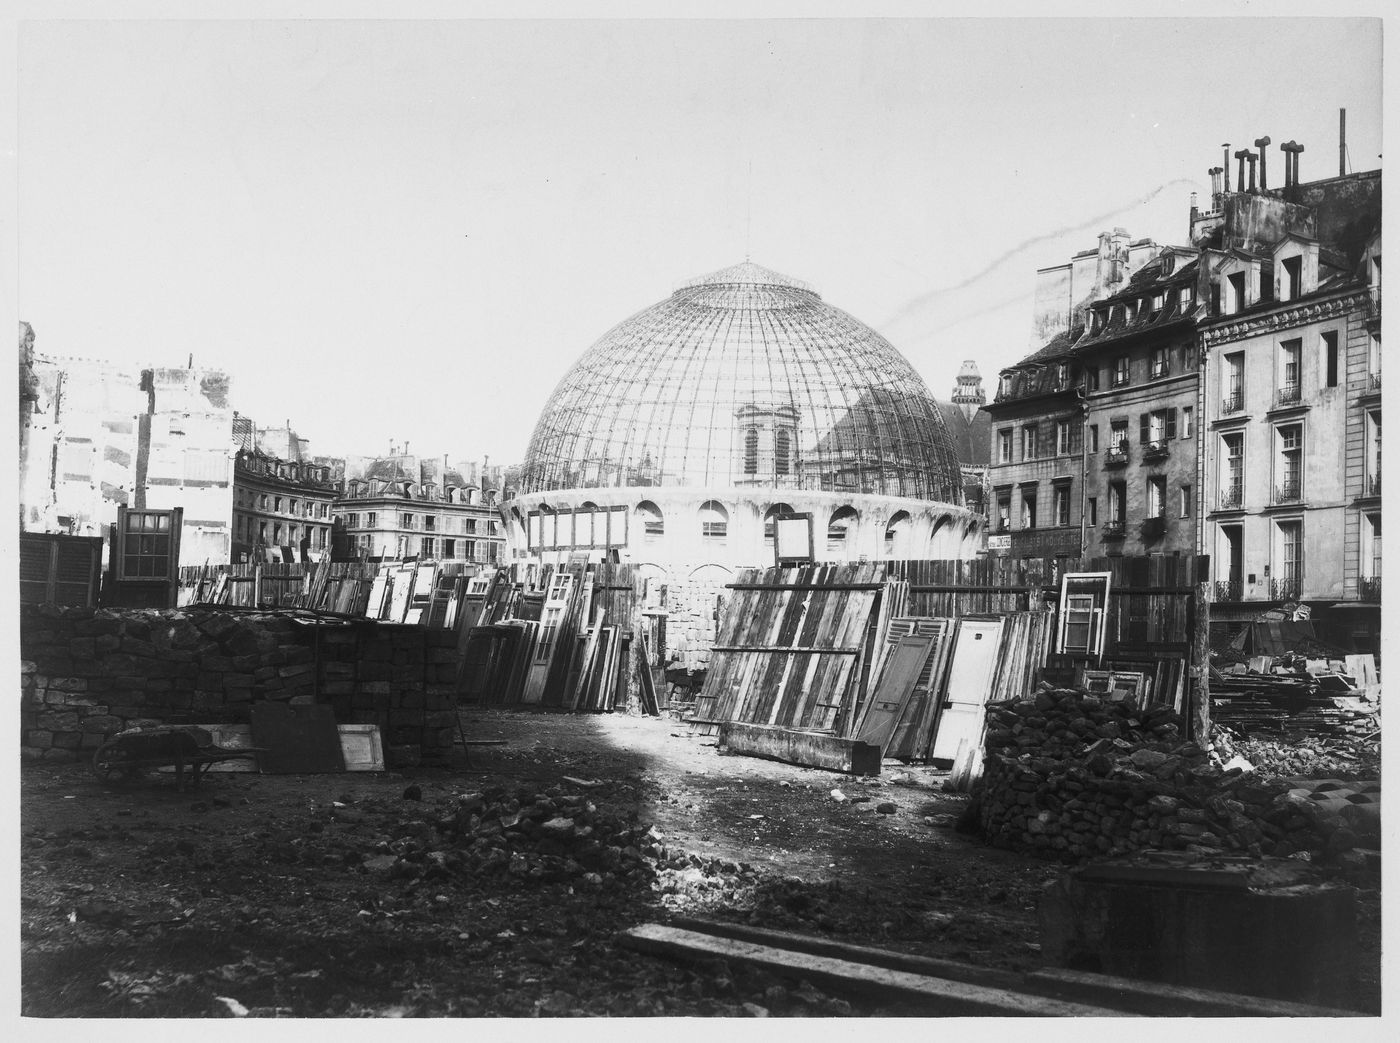 Corn Exchange, domes structure in a street surrounded by bricks, rubble, fences, and stacks of old doors, Paris, France